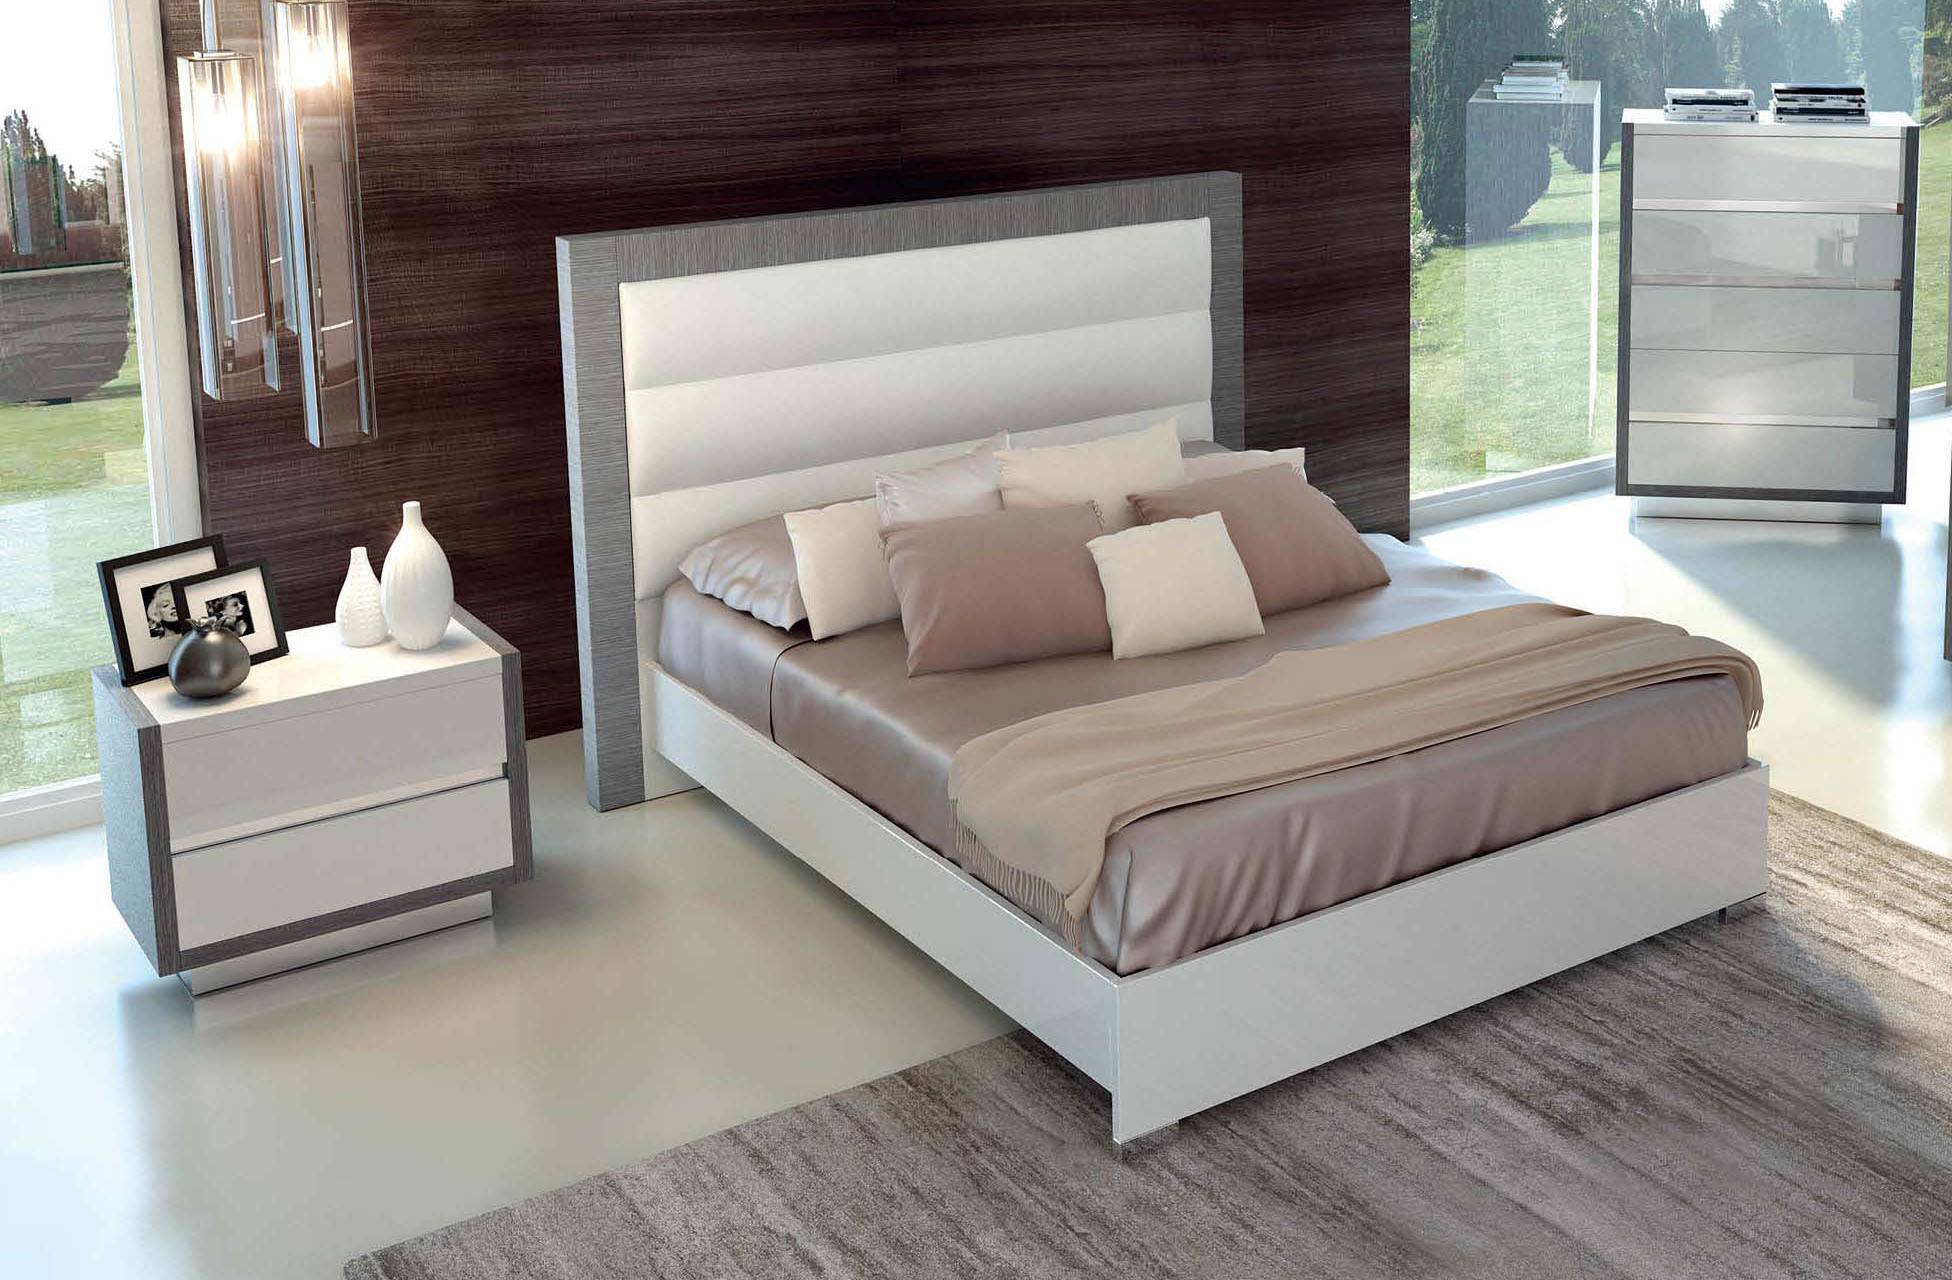 Made in Italy Quality Luxury Bedroom Sets - Click Image to Close